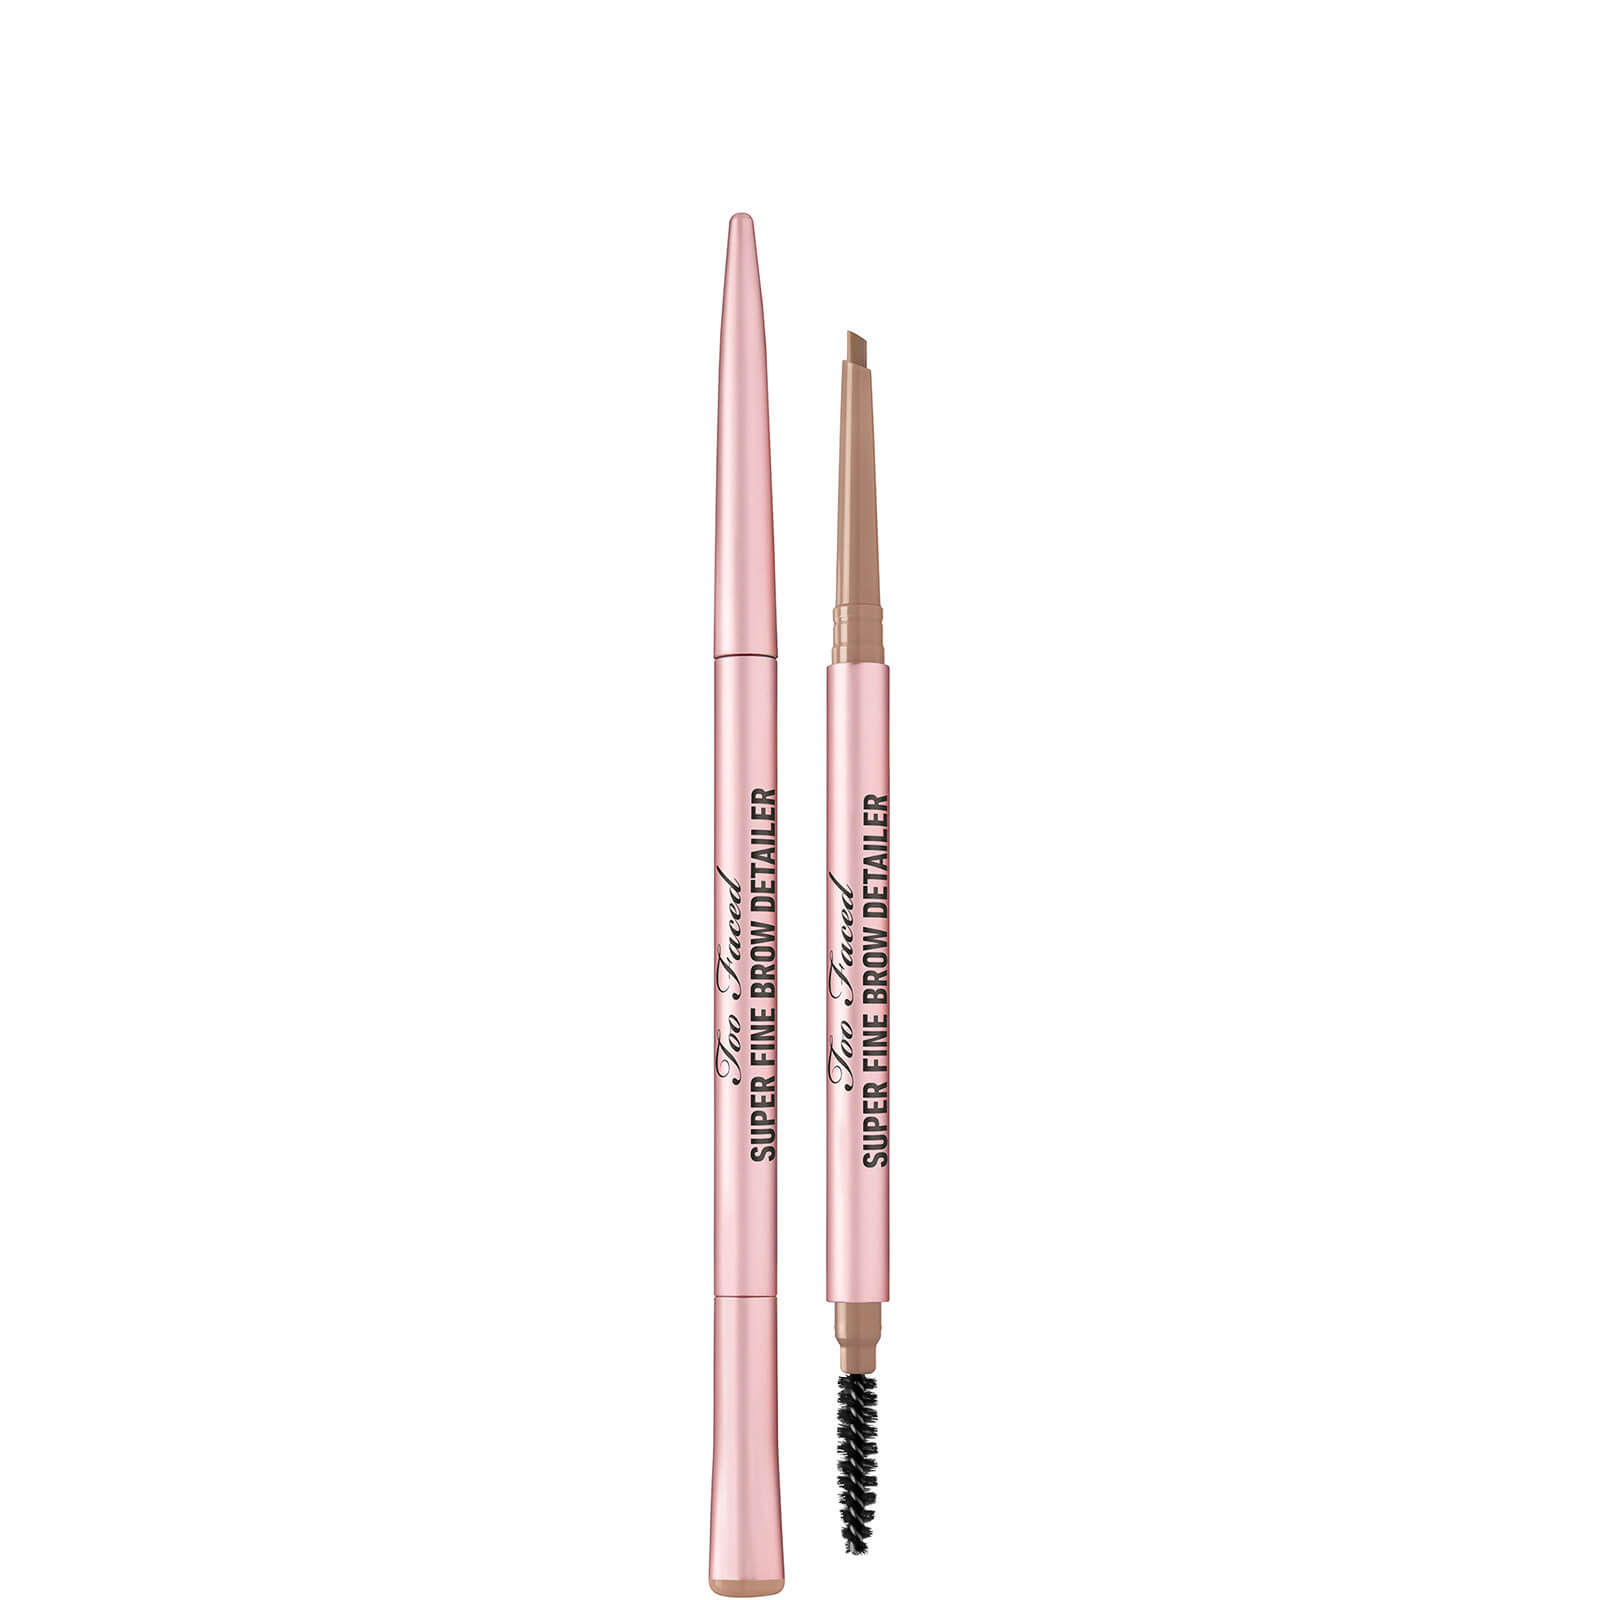 Image of Too Faced Superfine Brow Detailer Ultra Slim Brow Pencil 0.08g (Various Shades) - Taupe